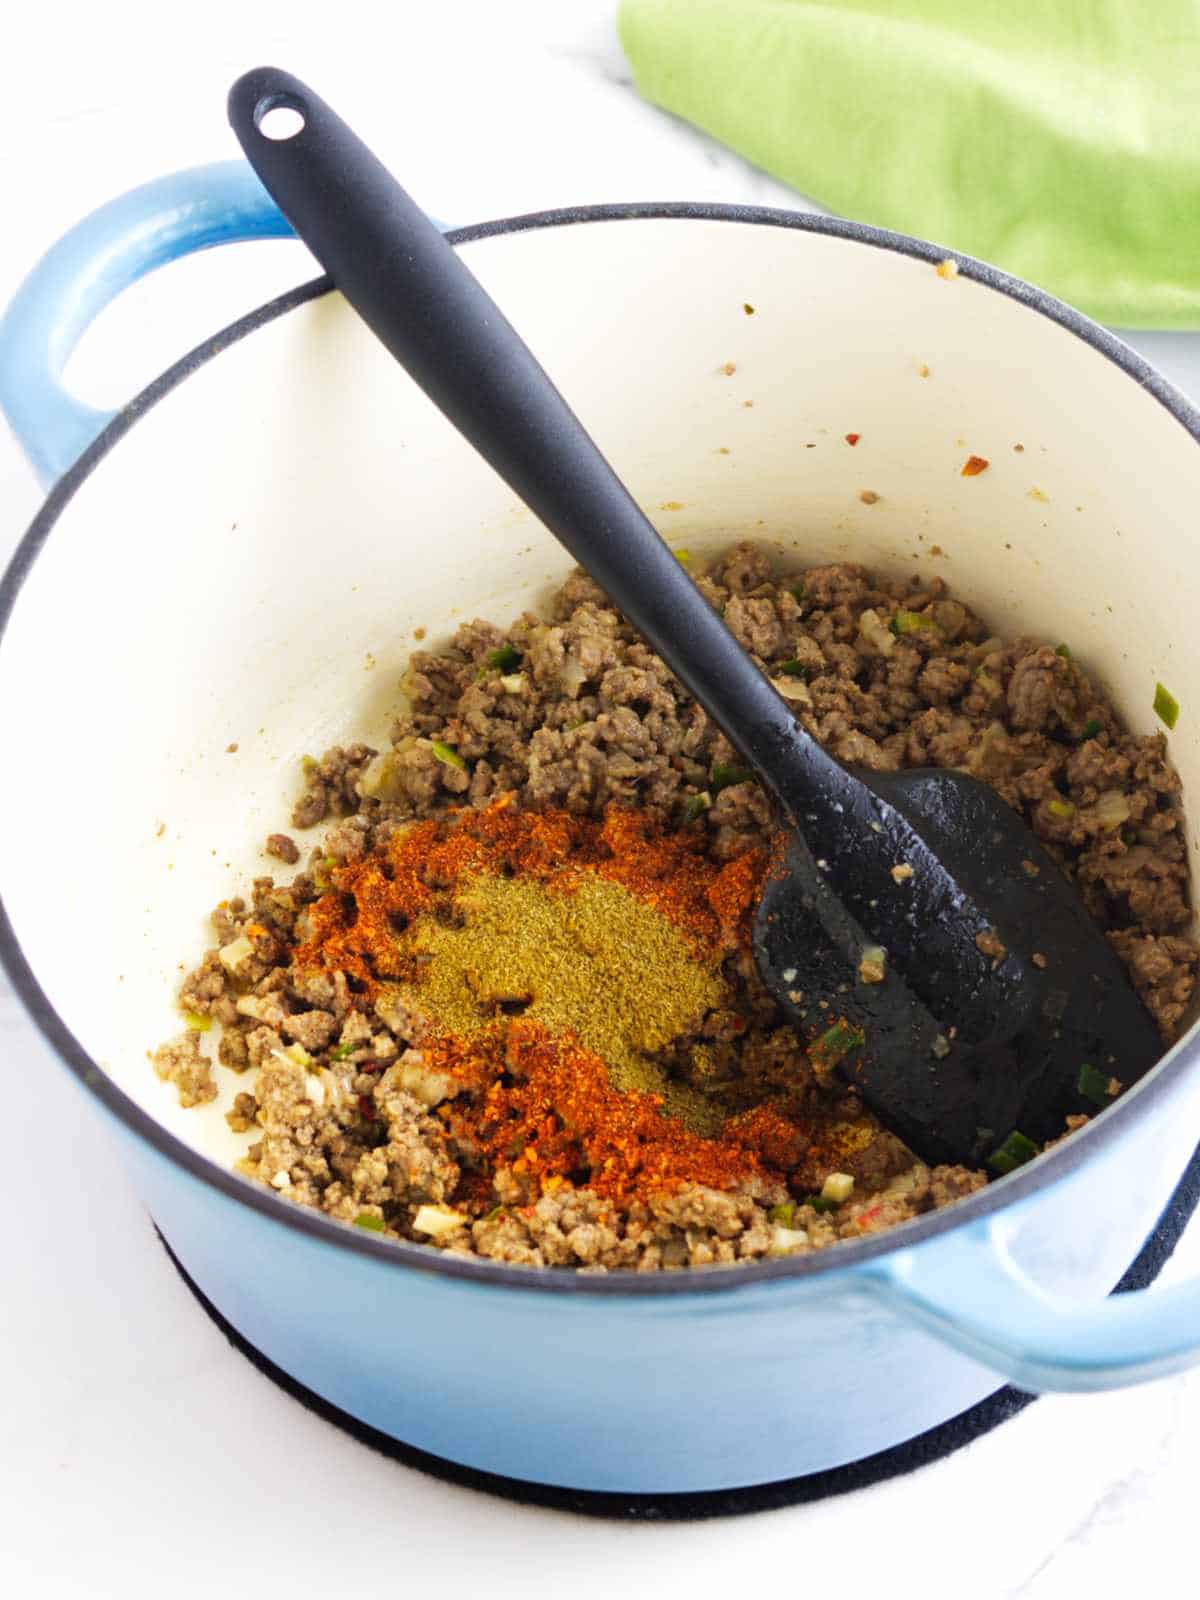 spices added to ground beef in an enameled dutch oven.